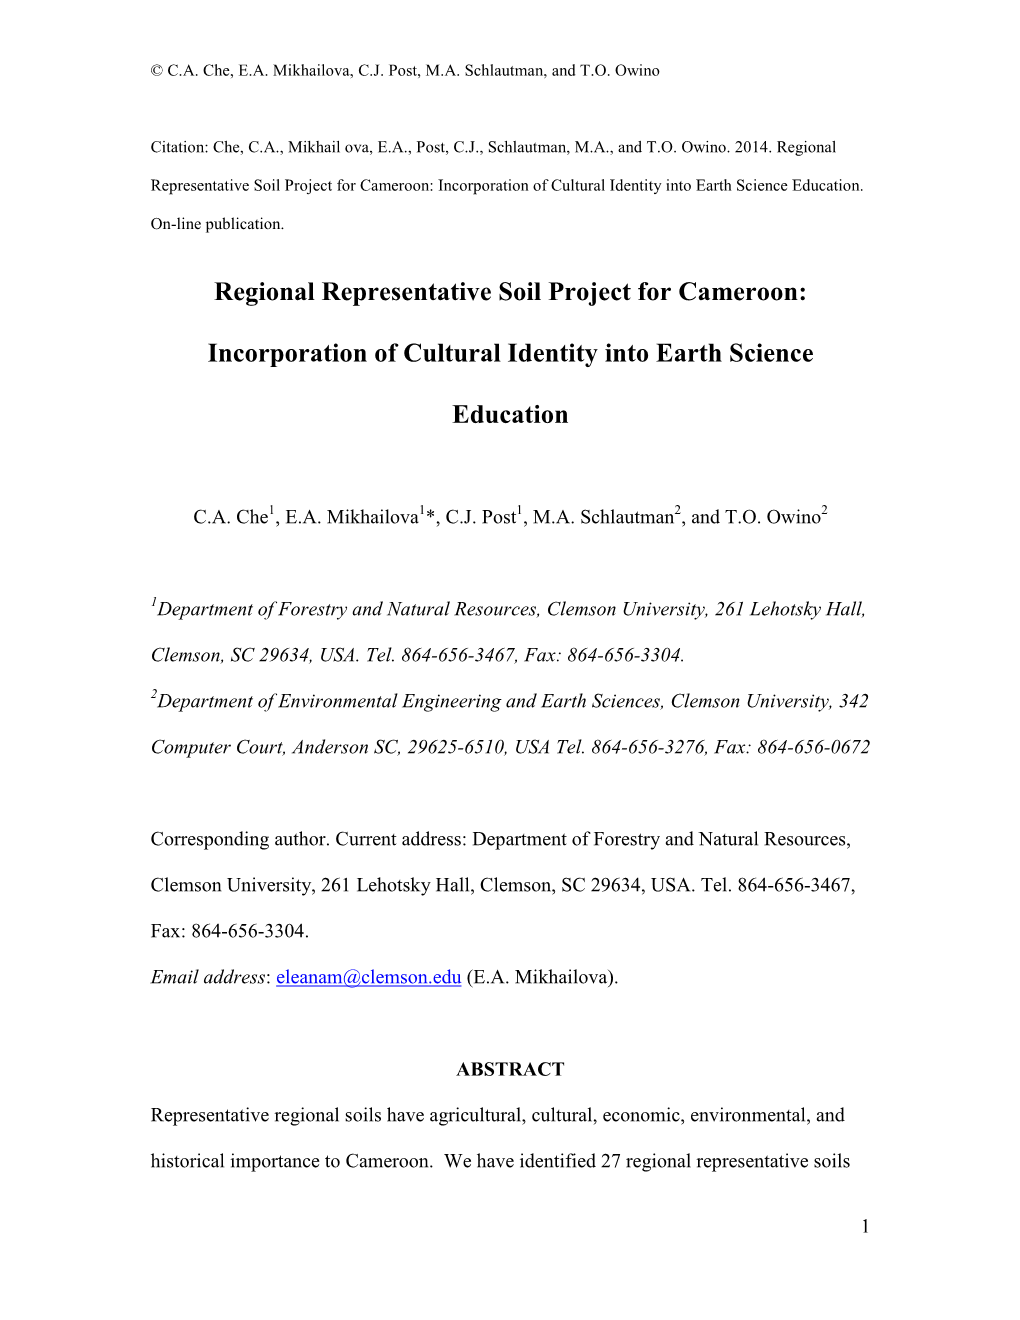 Regional Representative Soil Project for Cameroon: Incorporation of Cultural Identity Into Earth Science Education